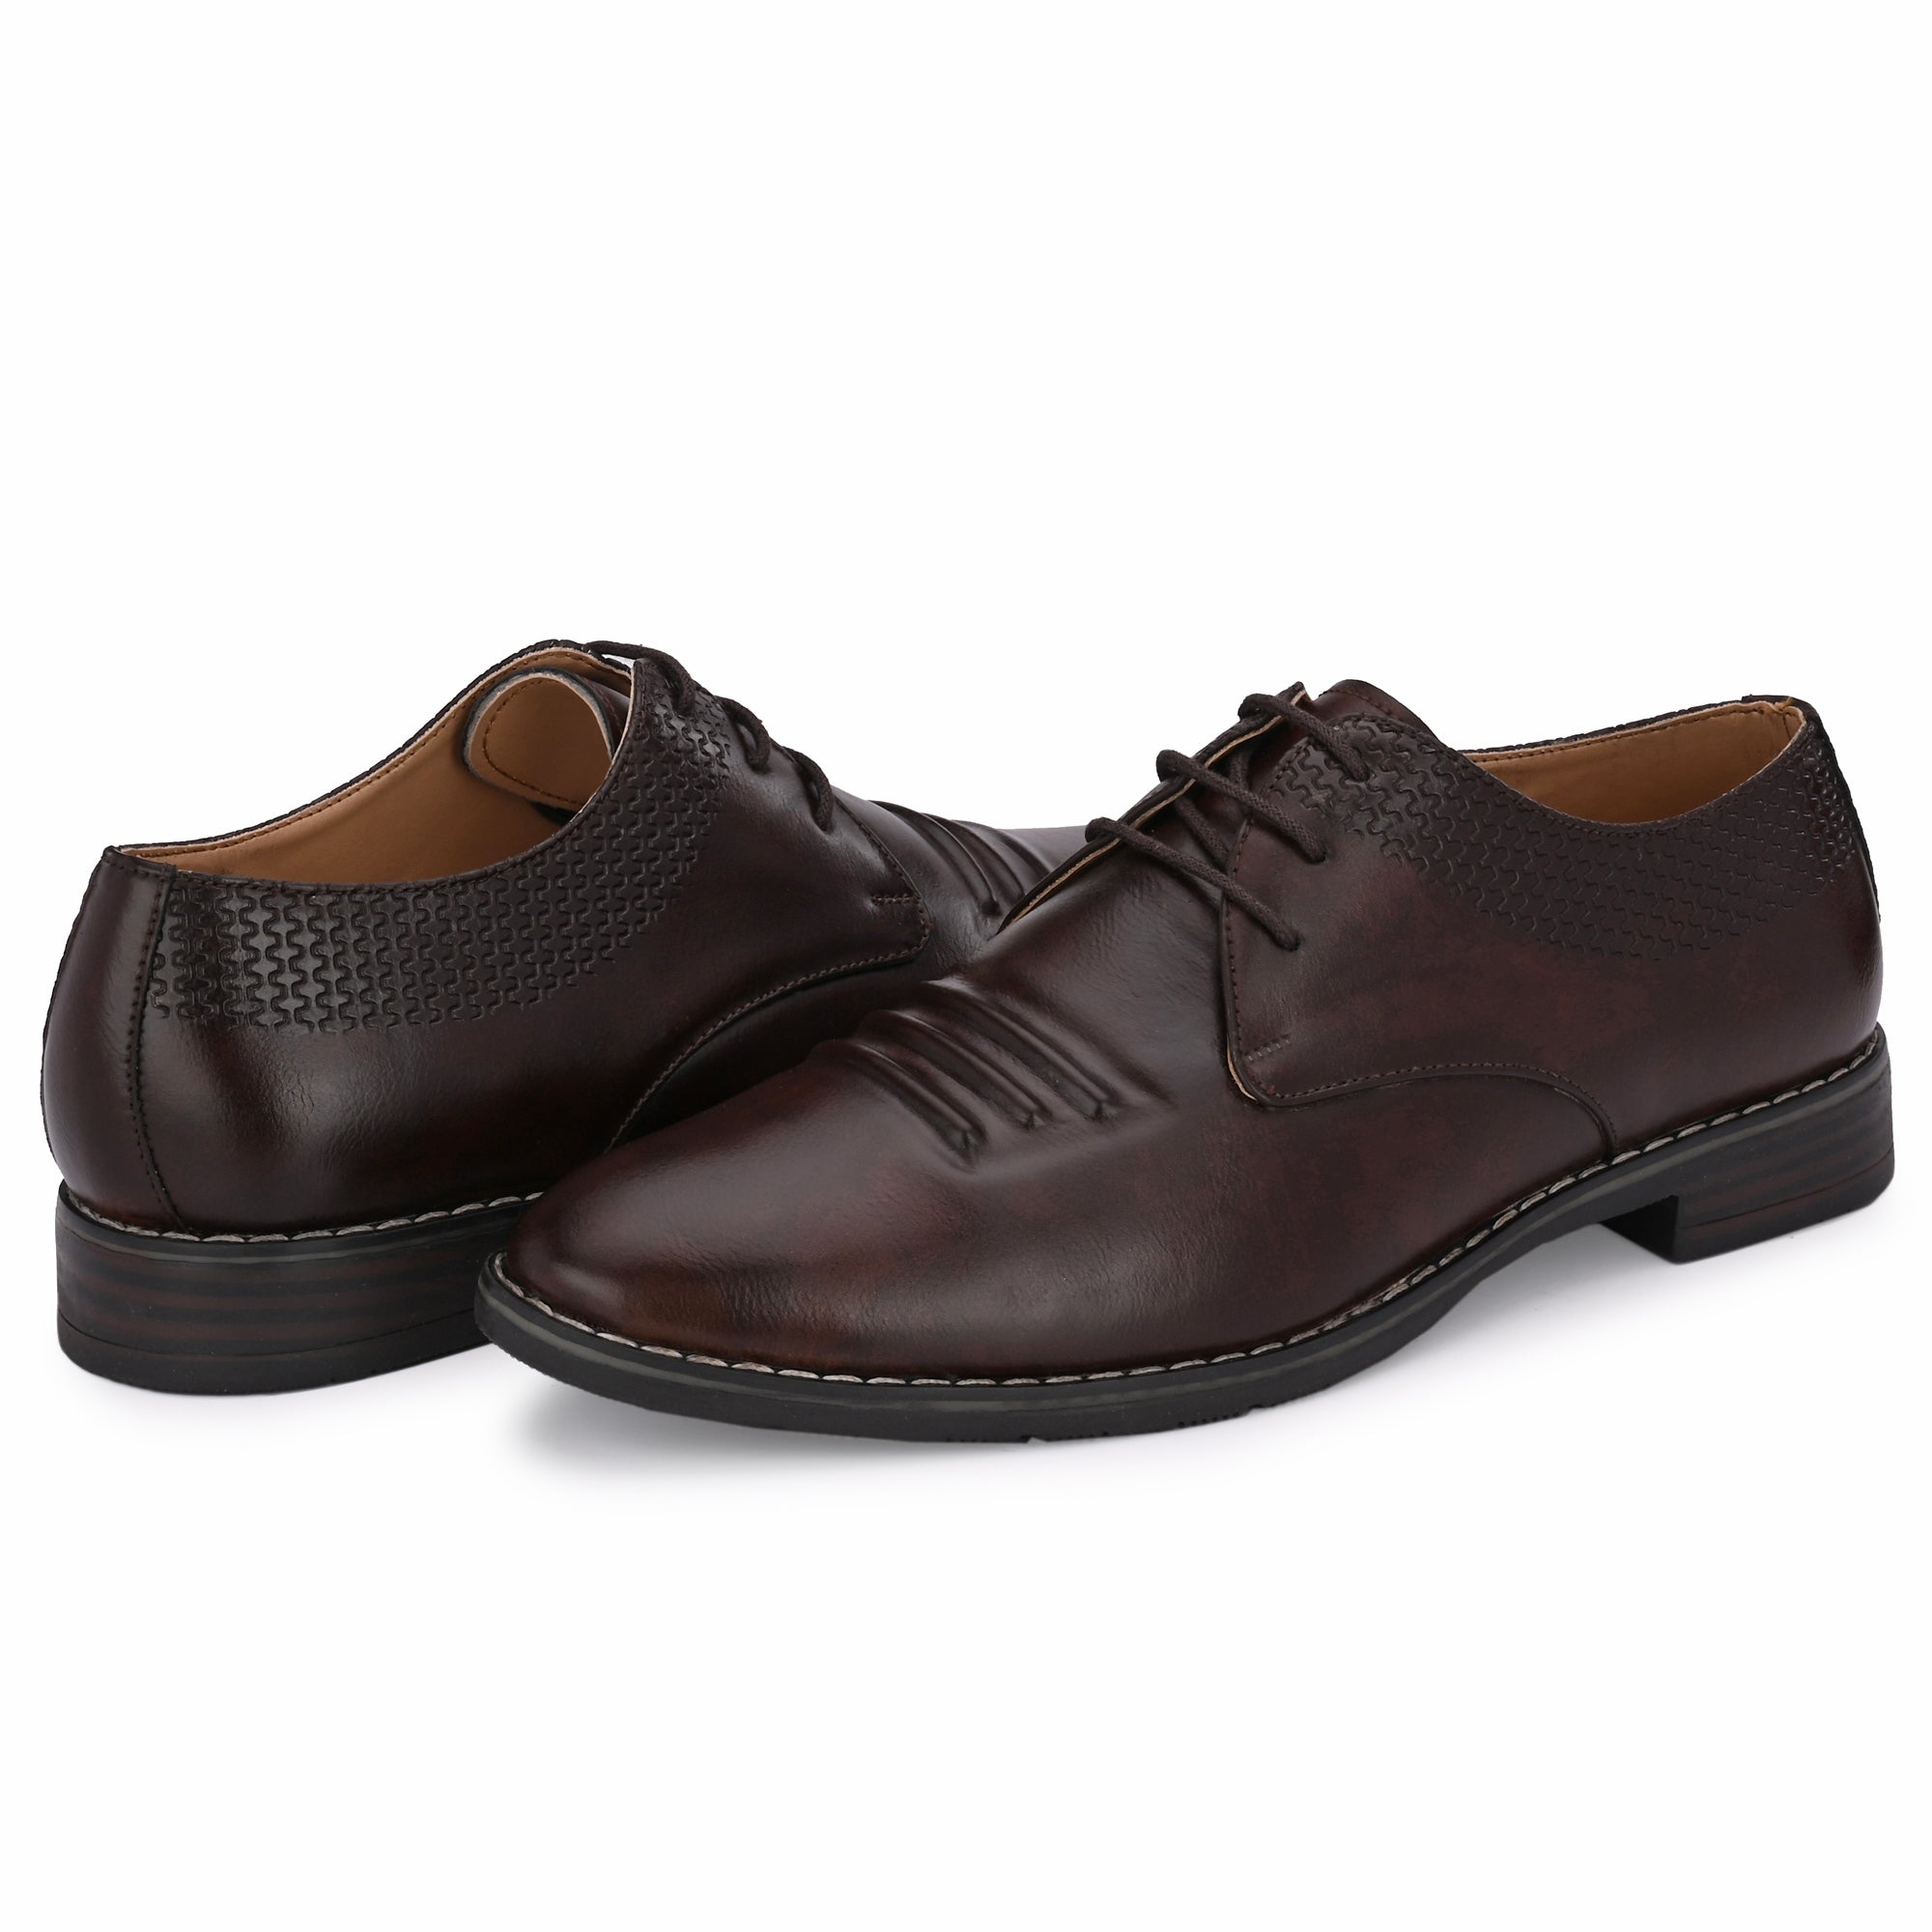 formal-lace-up-attitudist-shoes-for-men-with-design-3703brown